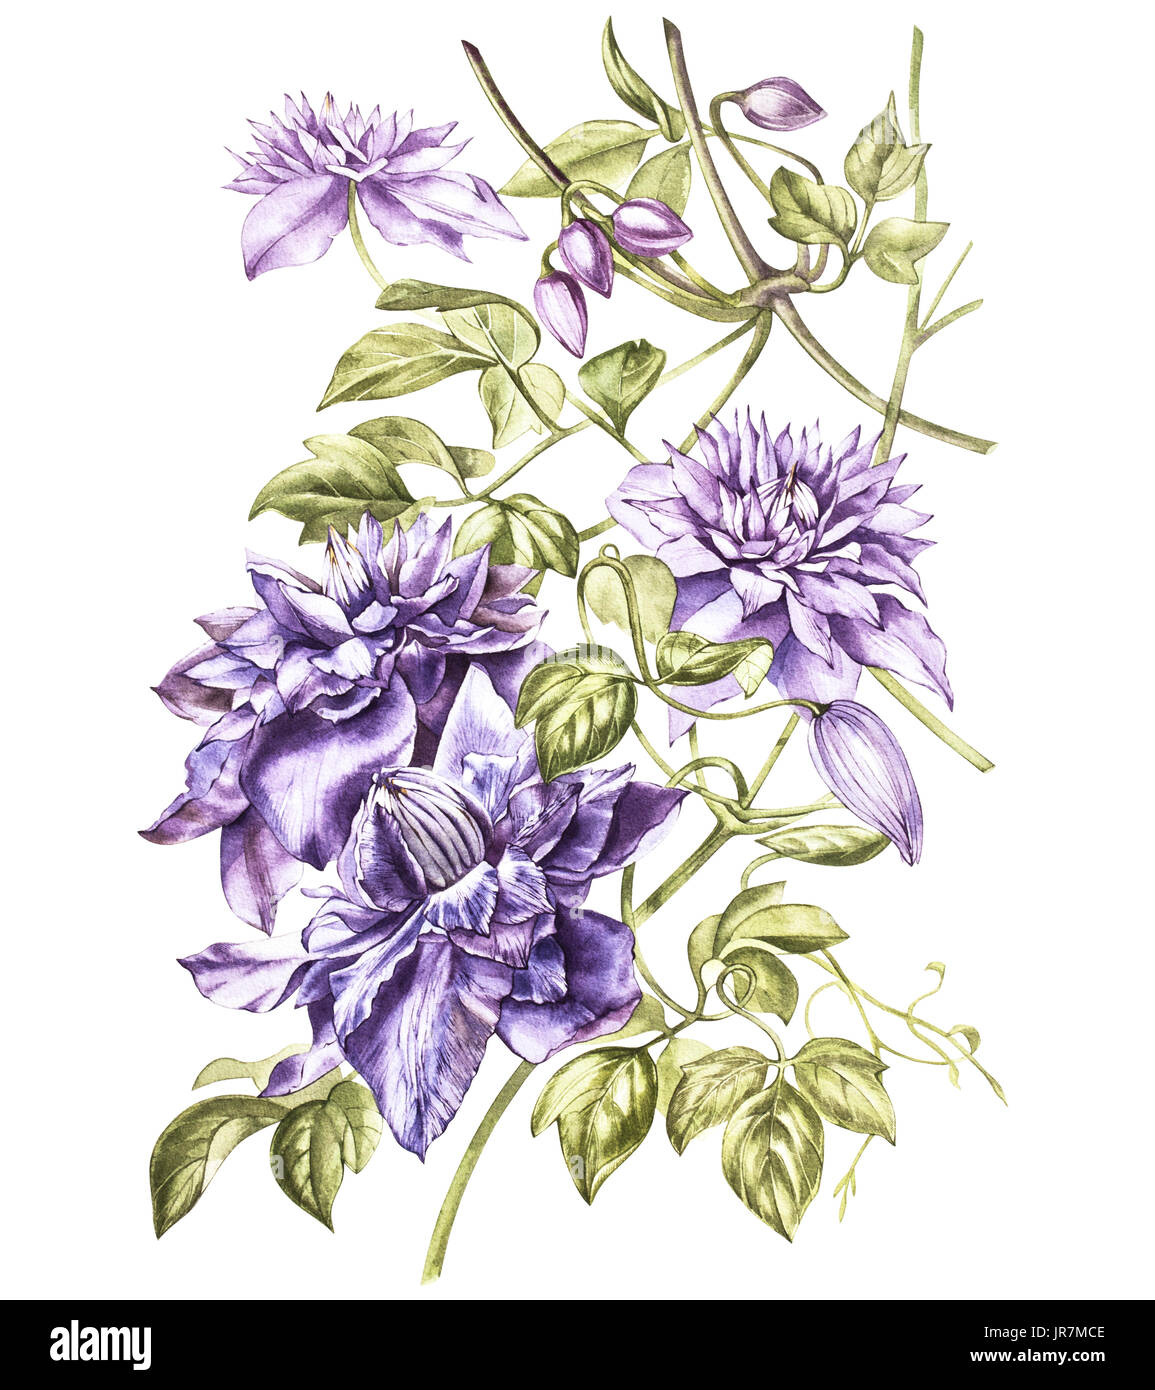 Illustration in watercolor of a clematis flower blossom. Floral card with flowers. Botanical illustration Stock Photo